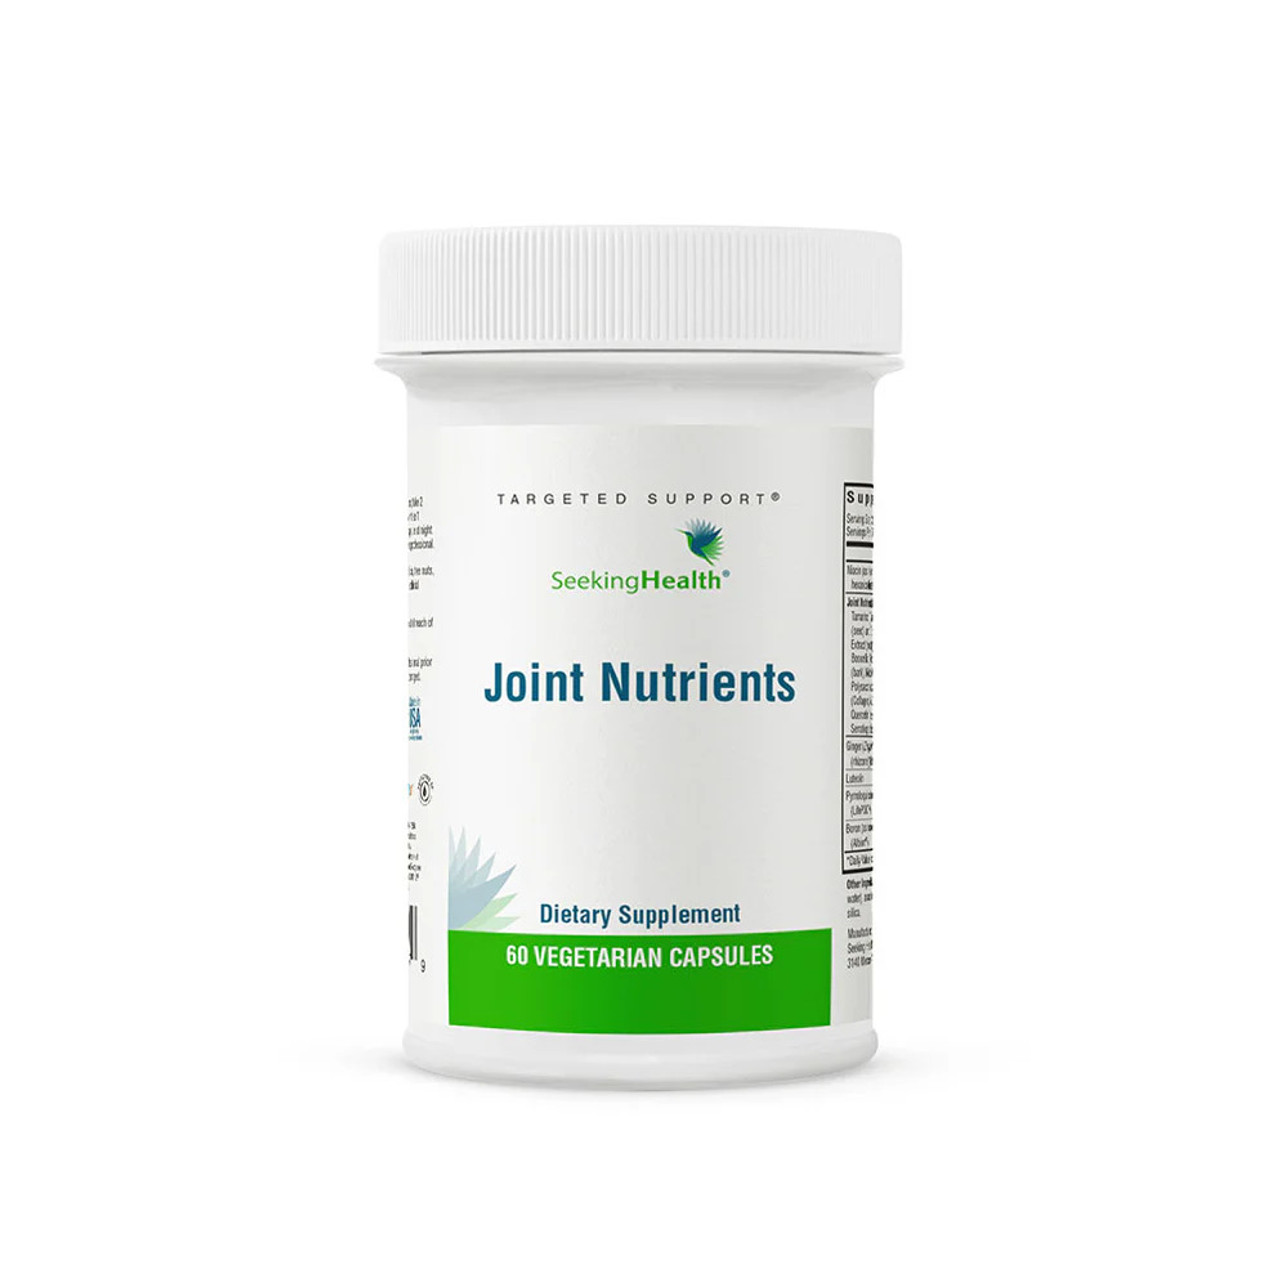 Seeking Health - Joint Nutrients - Brand new product! - 60 capsules